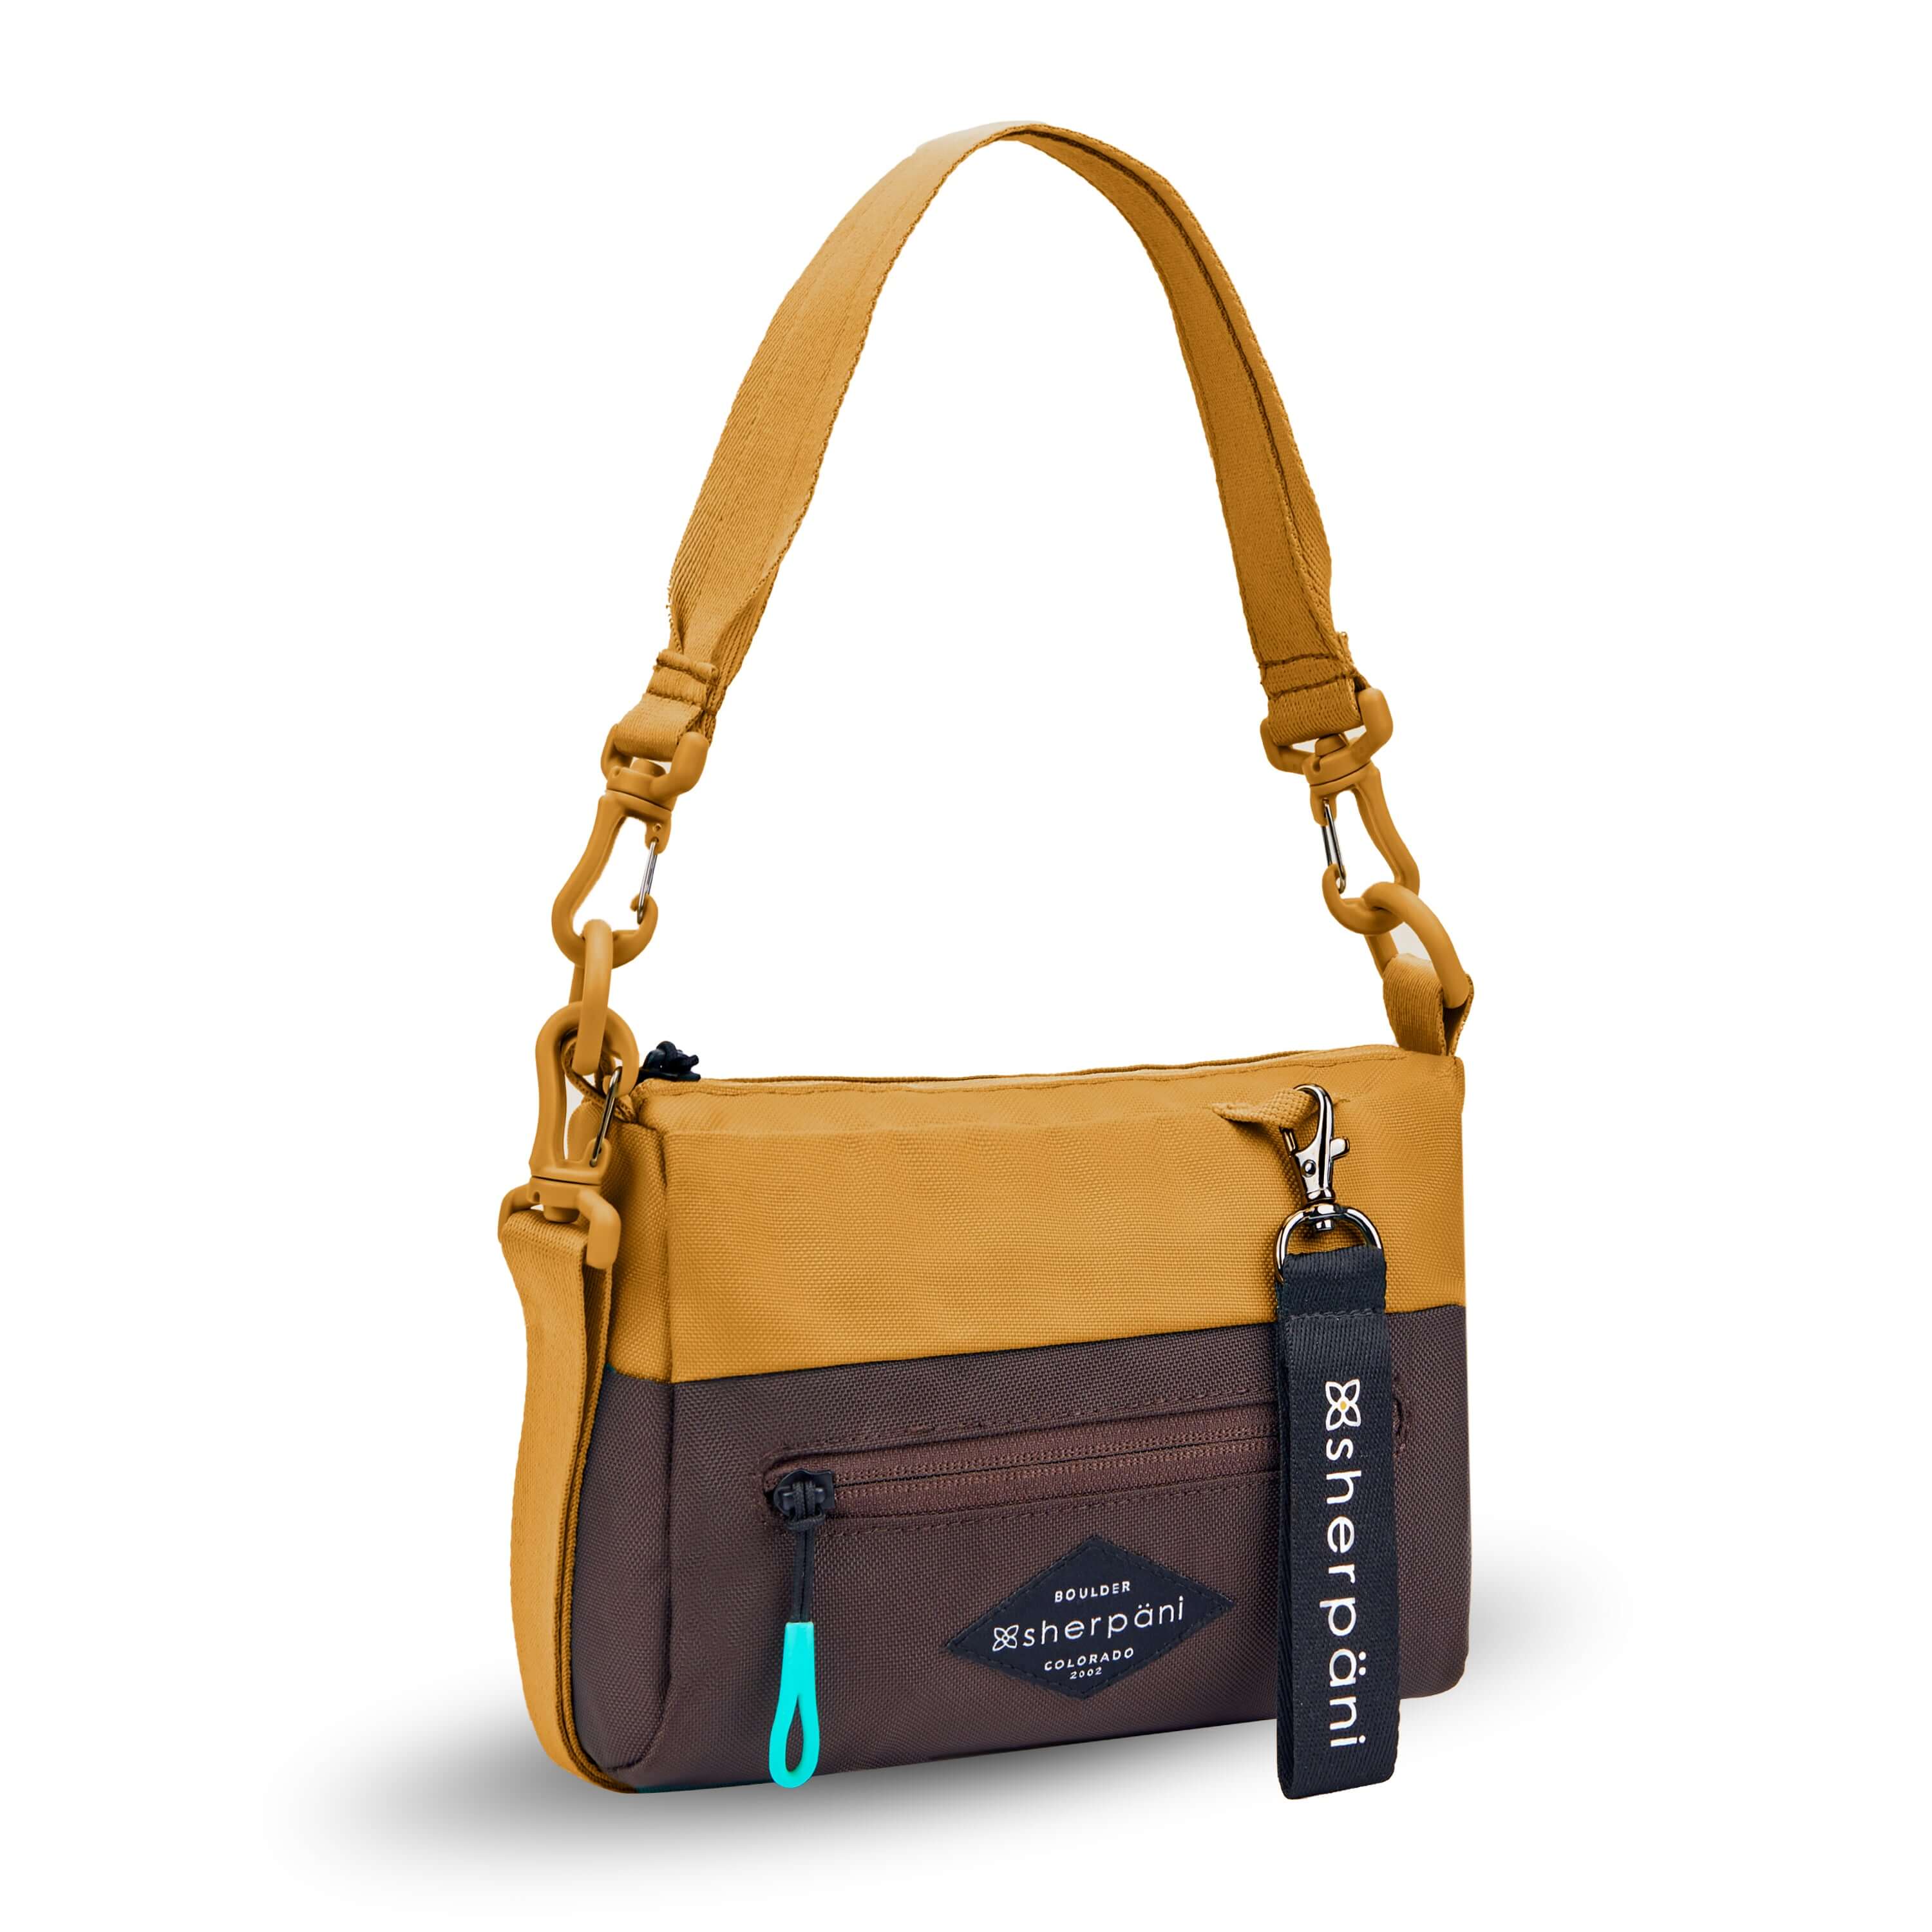 Angled front view of Sherpani's purse, the Skye in Sundial. It is two-toned, the top half of the bag is burnt yellow and the bottom half of the bag is brown. There is an external zipper compartment with an easy-pull zipper accented in aqua. There is a branded Sherpani keychain clipped to the upper right corner. The bag has a detachable short strap and a longer detachable/adjustable crossbody strap. #color_sundial-v1